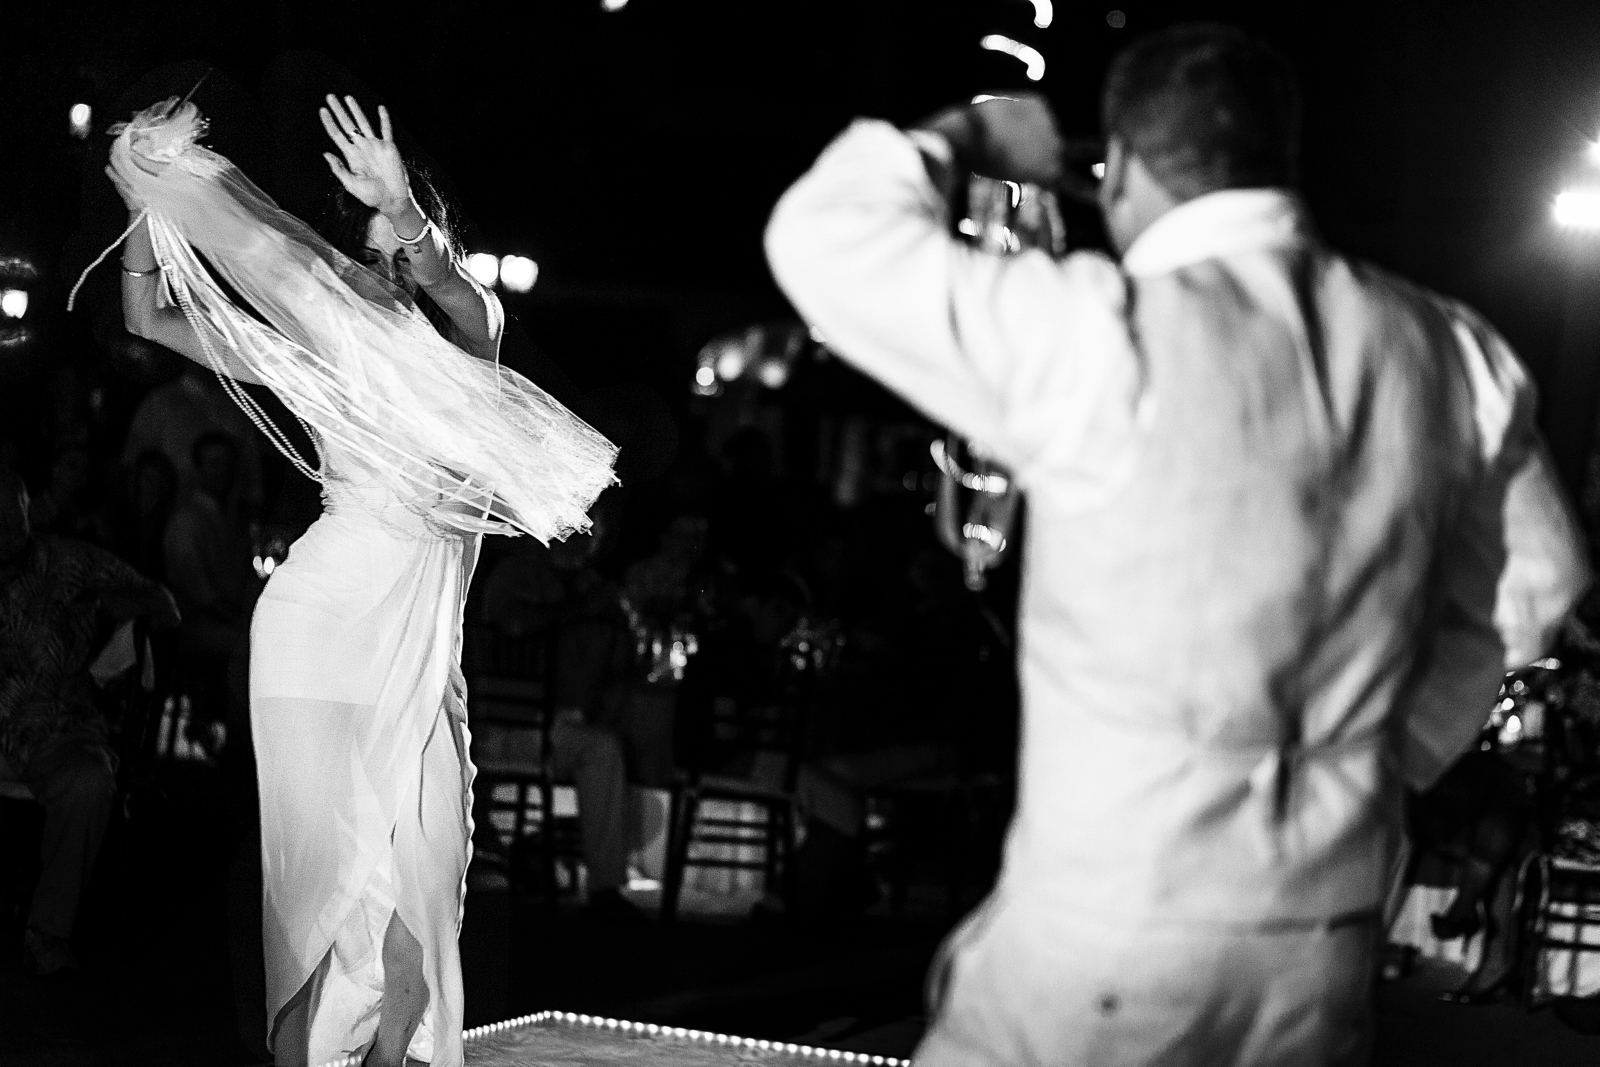 Wedding female guest dancing during traditional Persian dance for the groom to recover the wedding cake knife